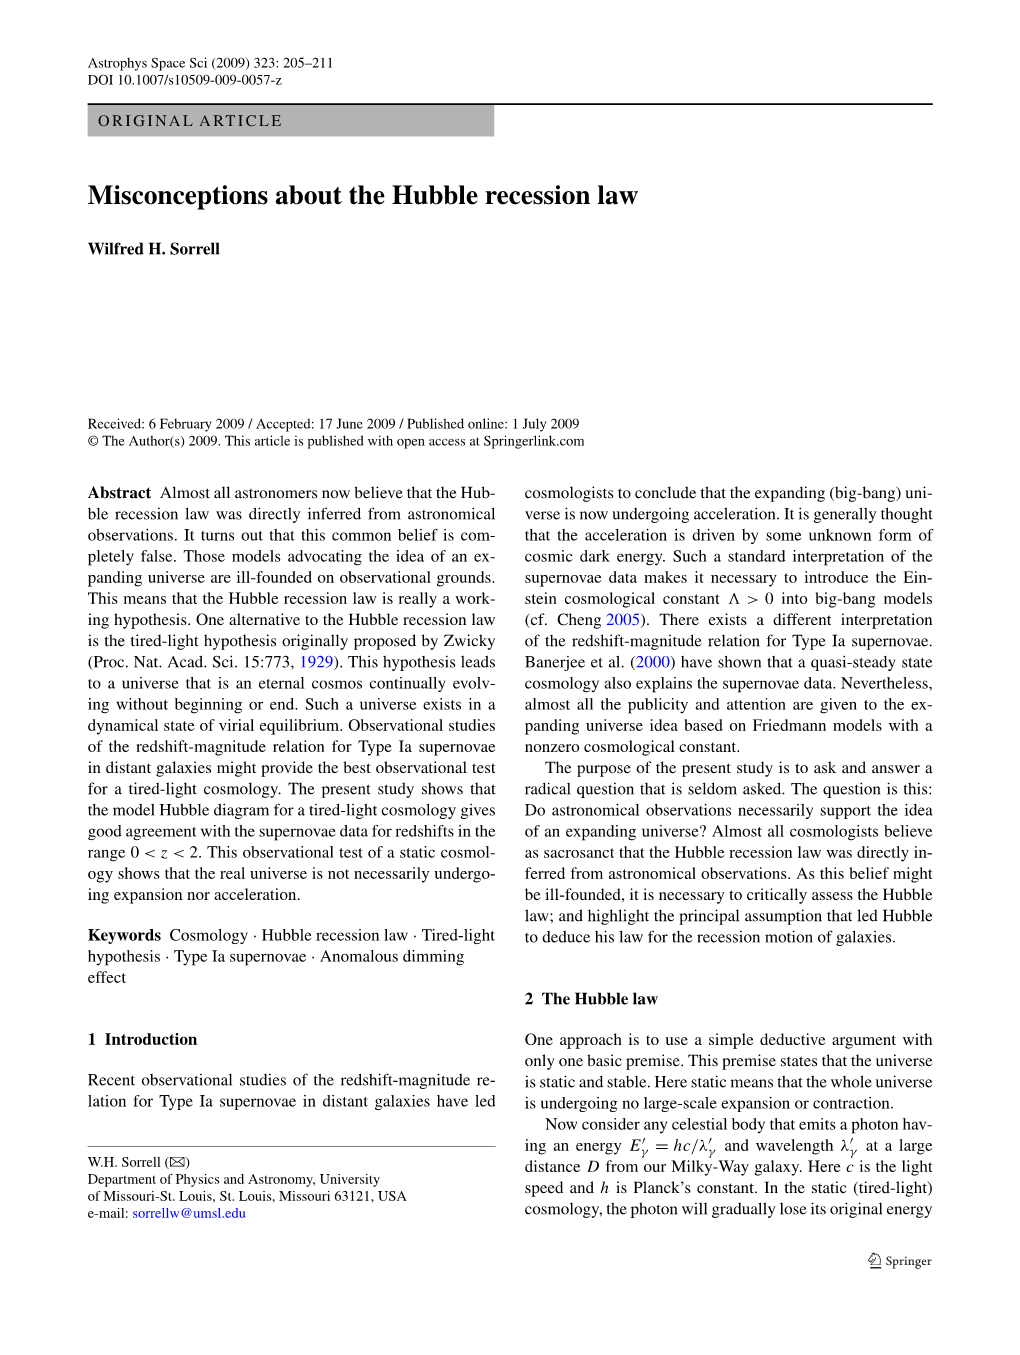 Misconceptions About the Hubble Recession Law